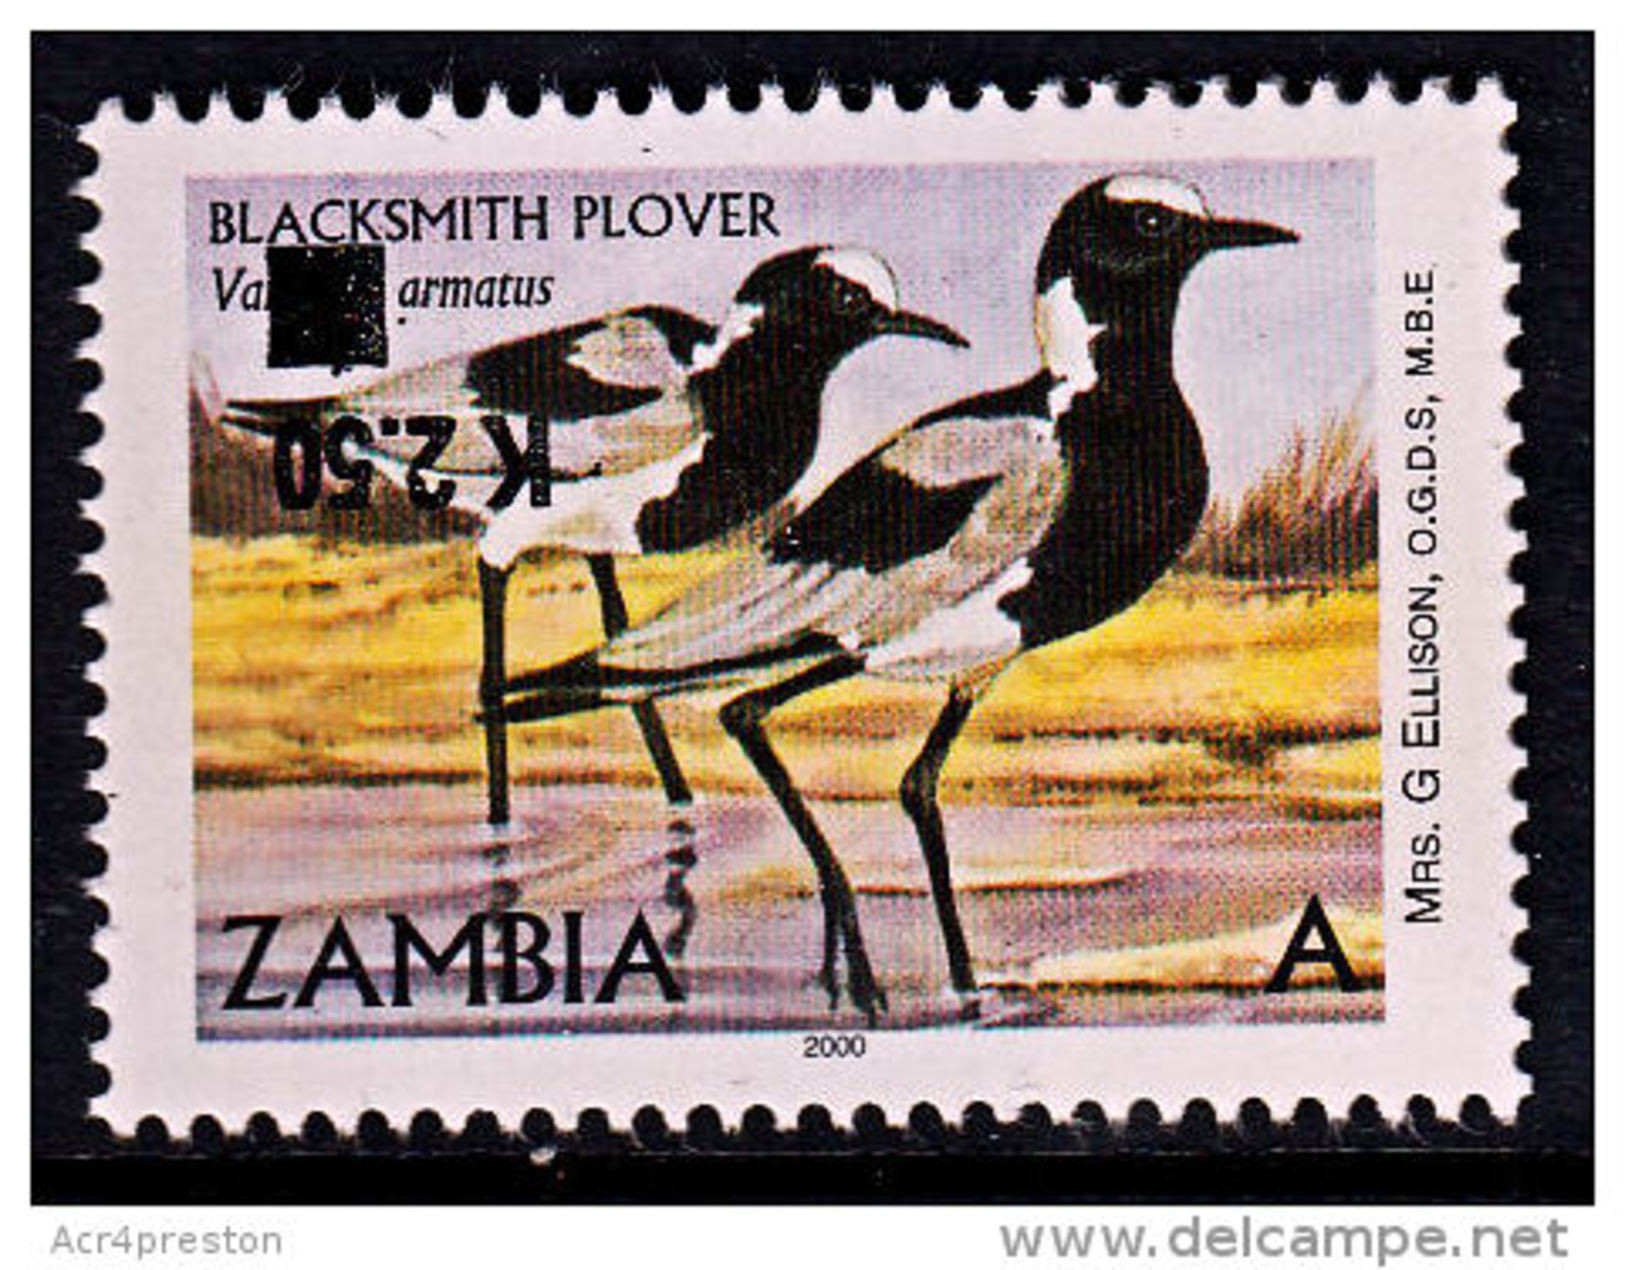 Zm1126a ZAMBIA 2014, K2.50 INVERTED Surcharge On 'A' Bird Blacksmith Plover  MNH (Issued 02-05-2014) - Zambia (1965-...)